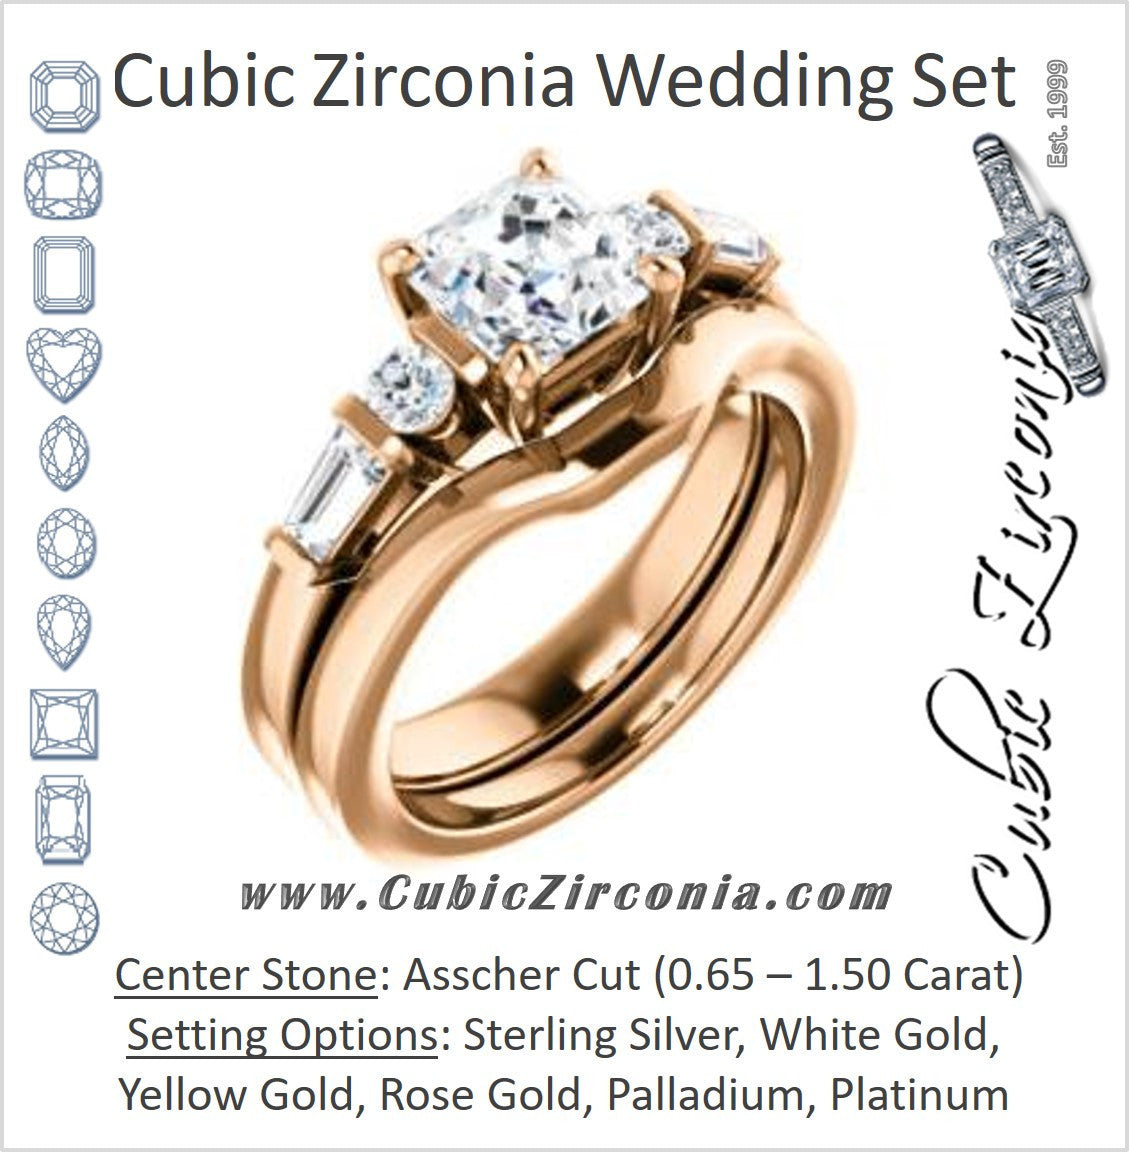 CZ Wedding Set, featuring The Sarah engagement ring (Customizable 5-stone Design with Asscher Cut Center and Baguette/Round Bar-set Accents)